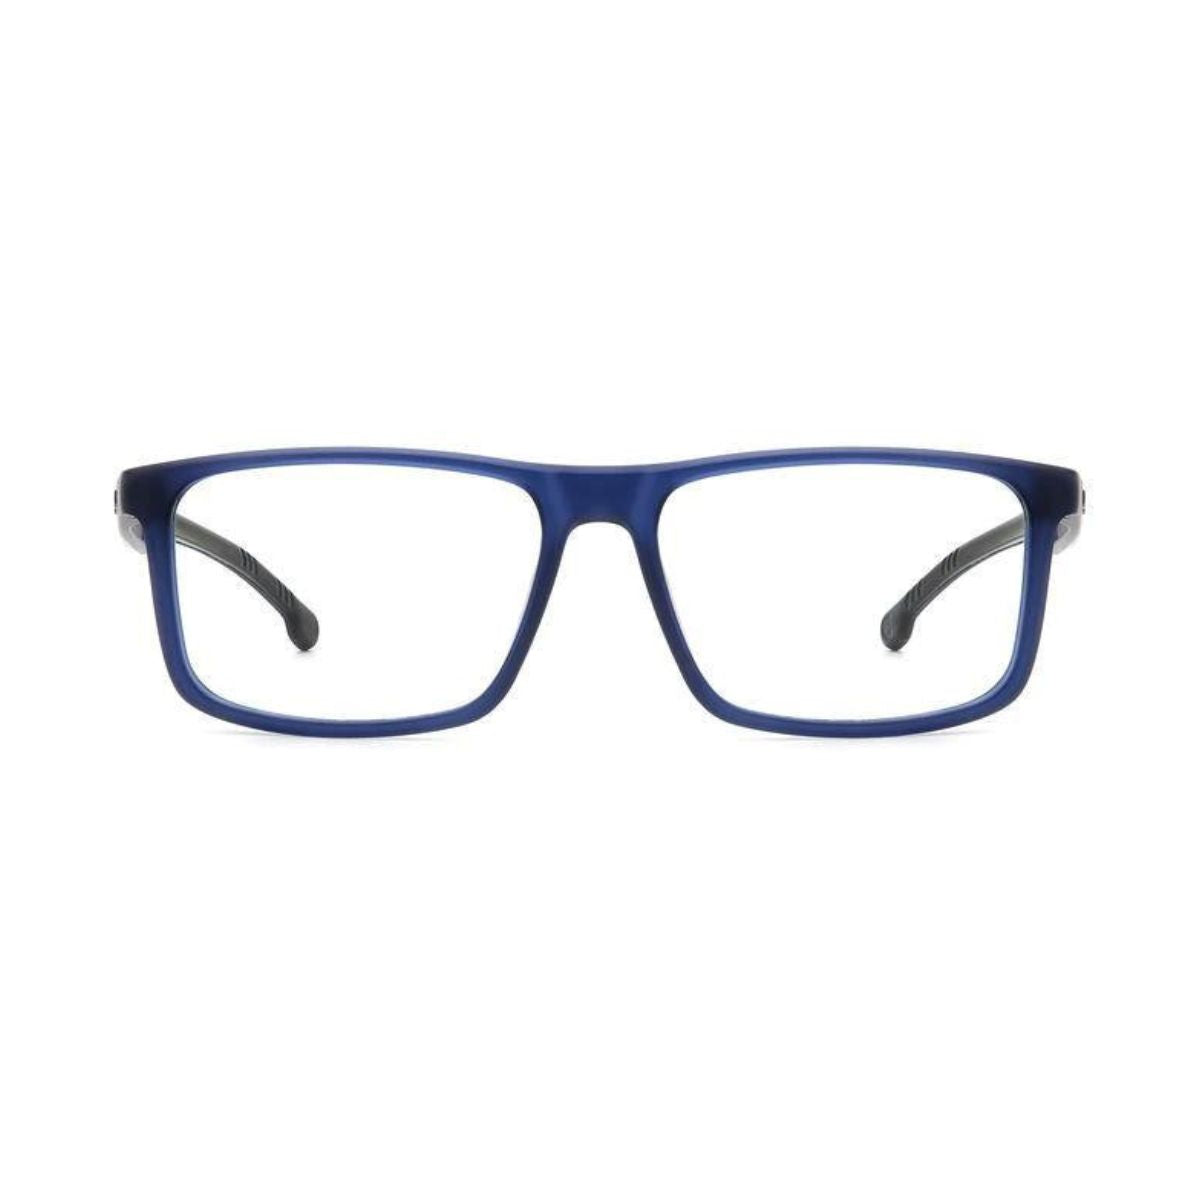 "Carrera CARDUC 024 FLL optiacl frame for men's online at optorium"